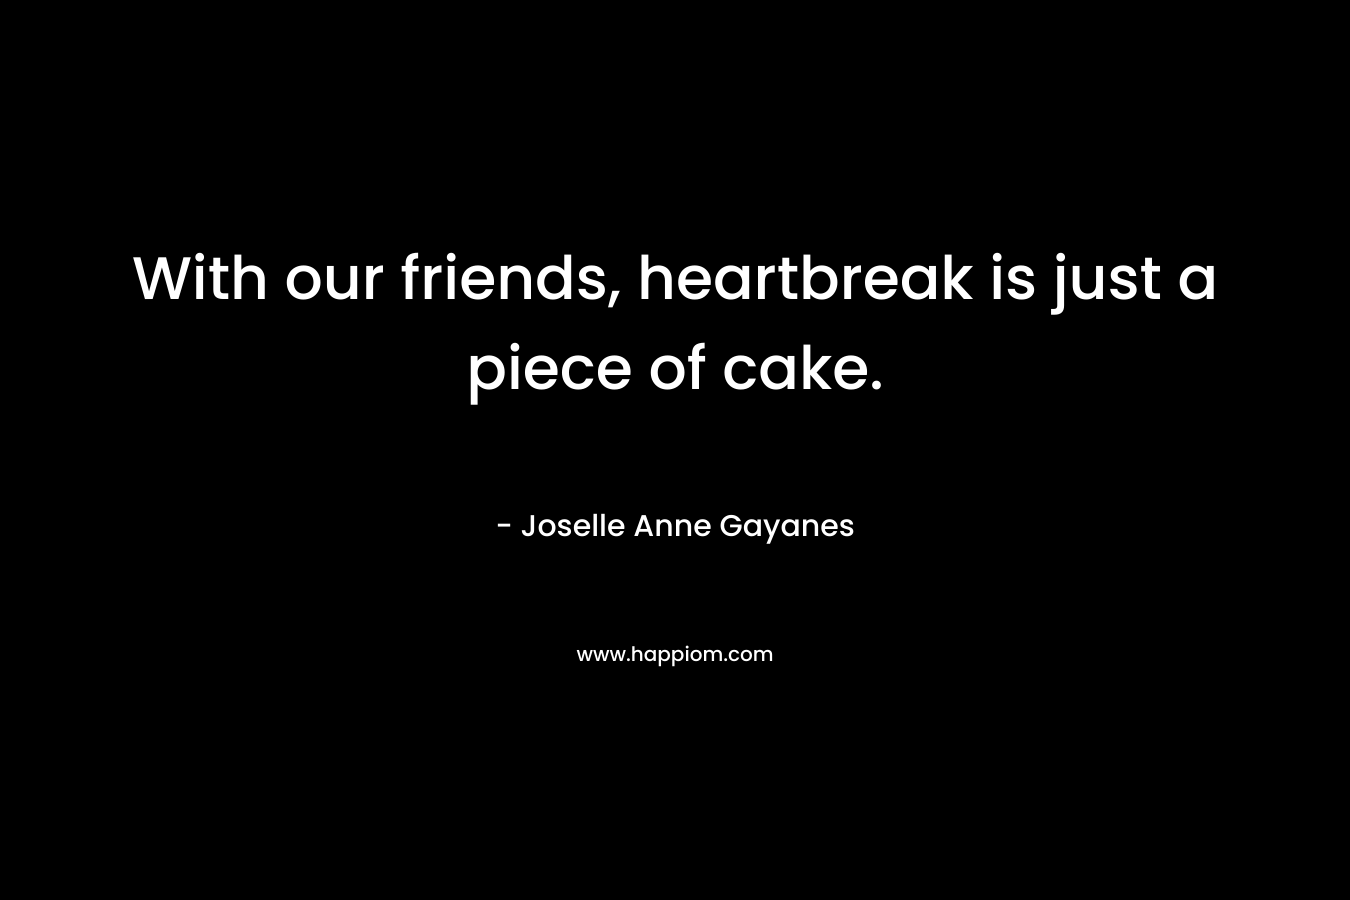 With our friends, heartbreak is just a piece of cake. – Joselle Anne Gayanes